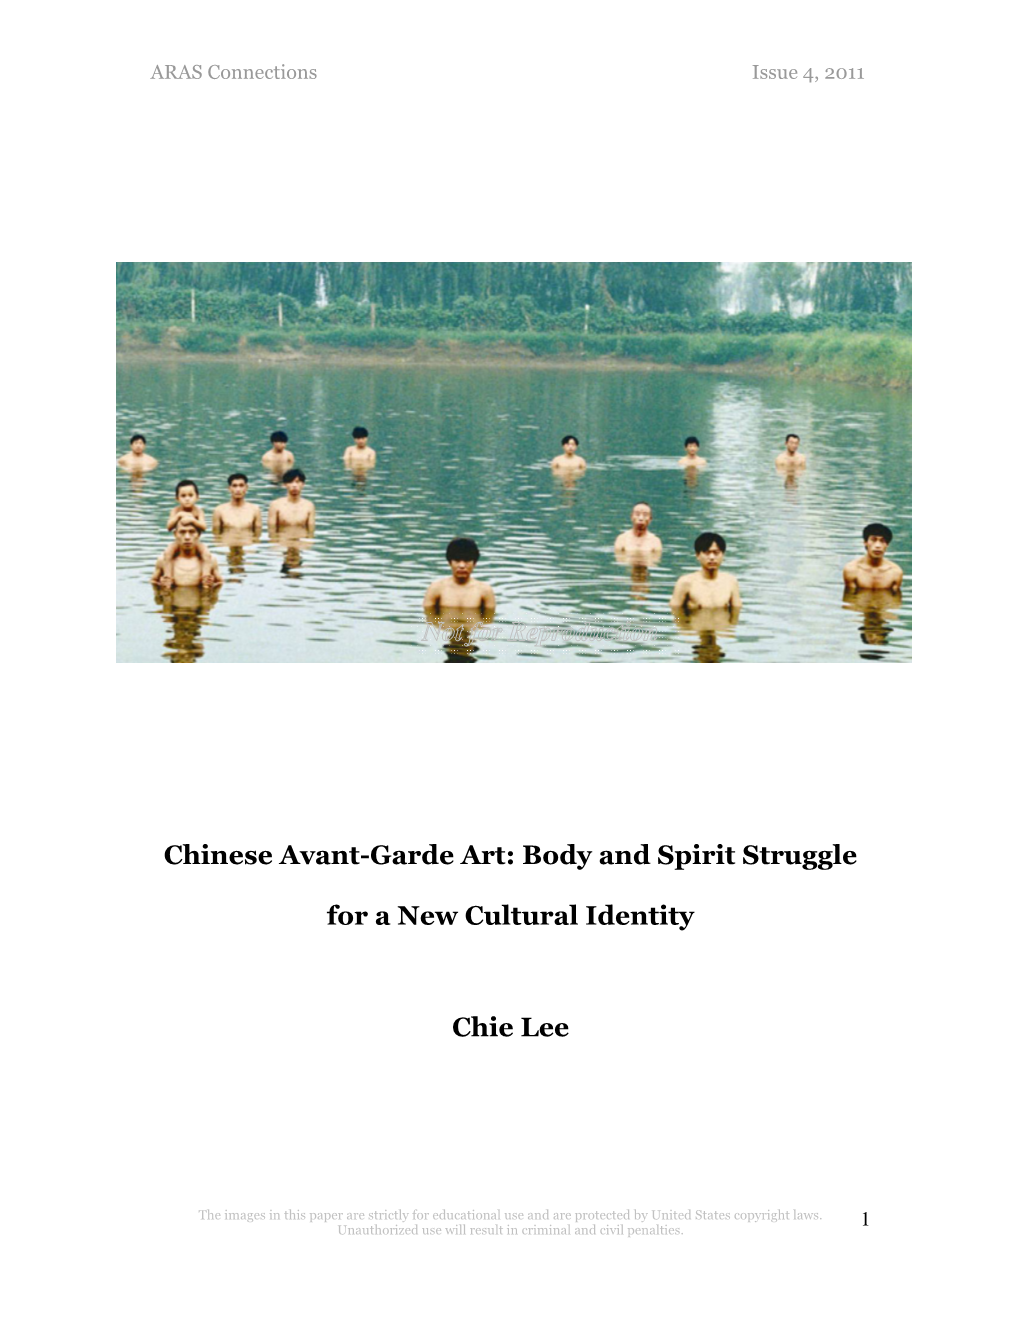 Chinese Avant-Garde Art: Body and Spirit Struggle for a New Cultural